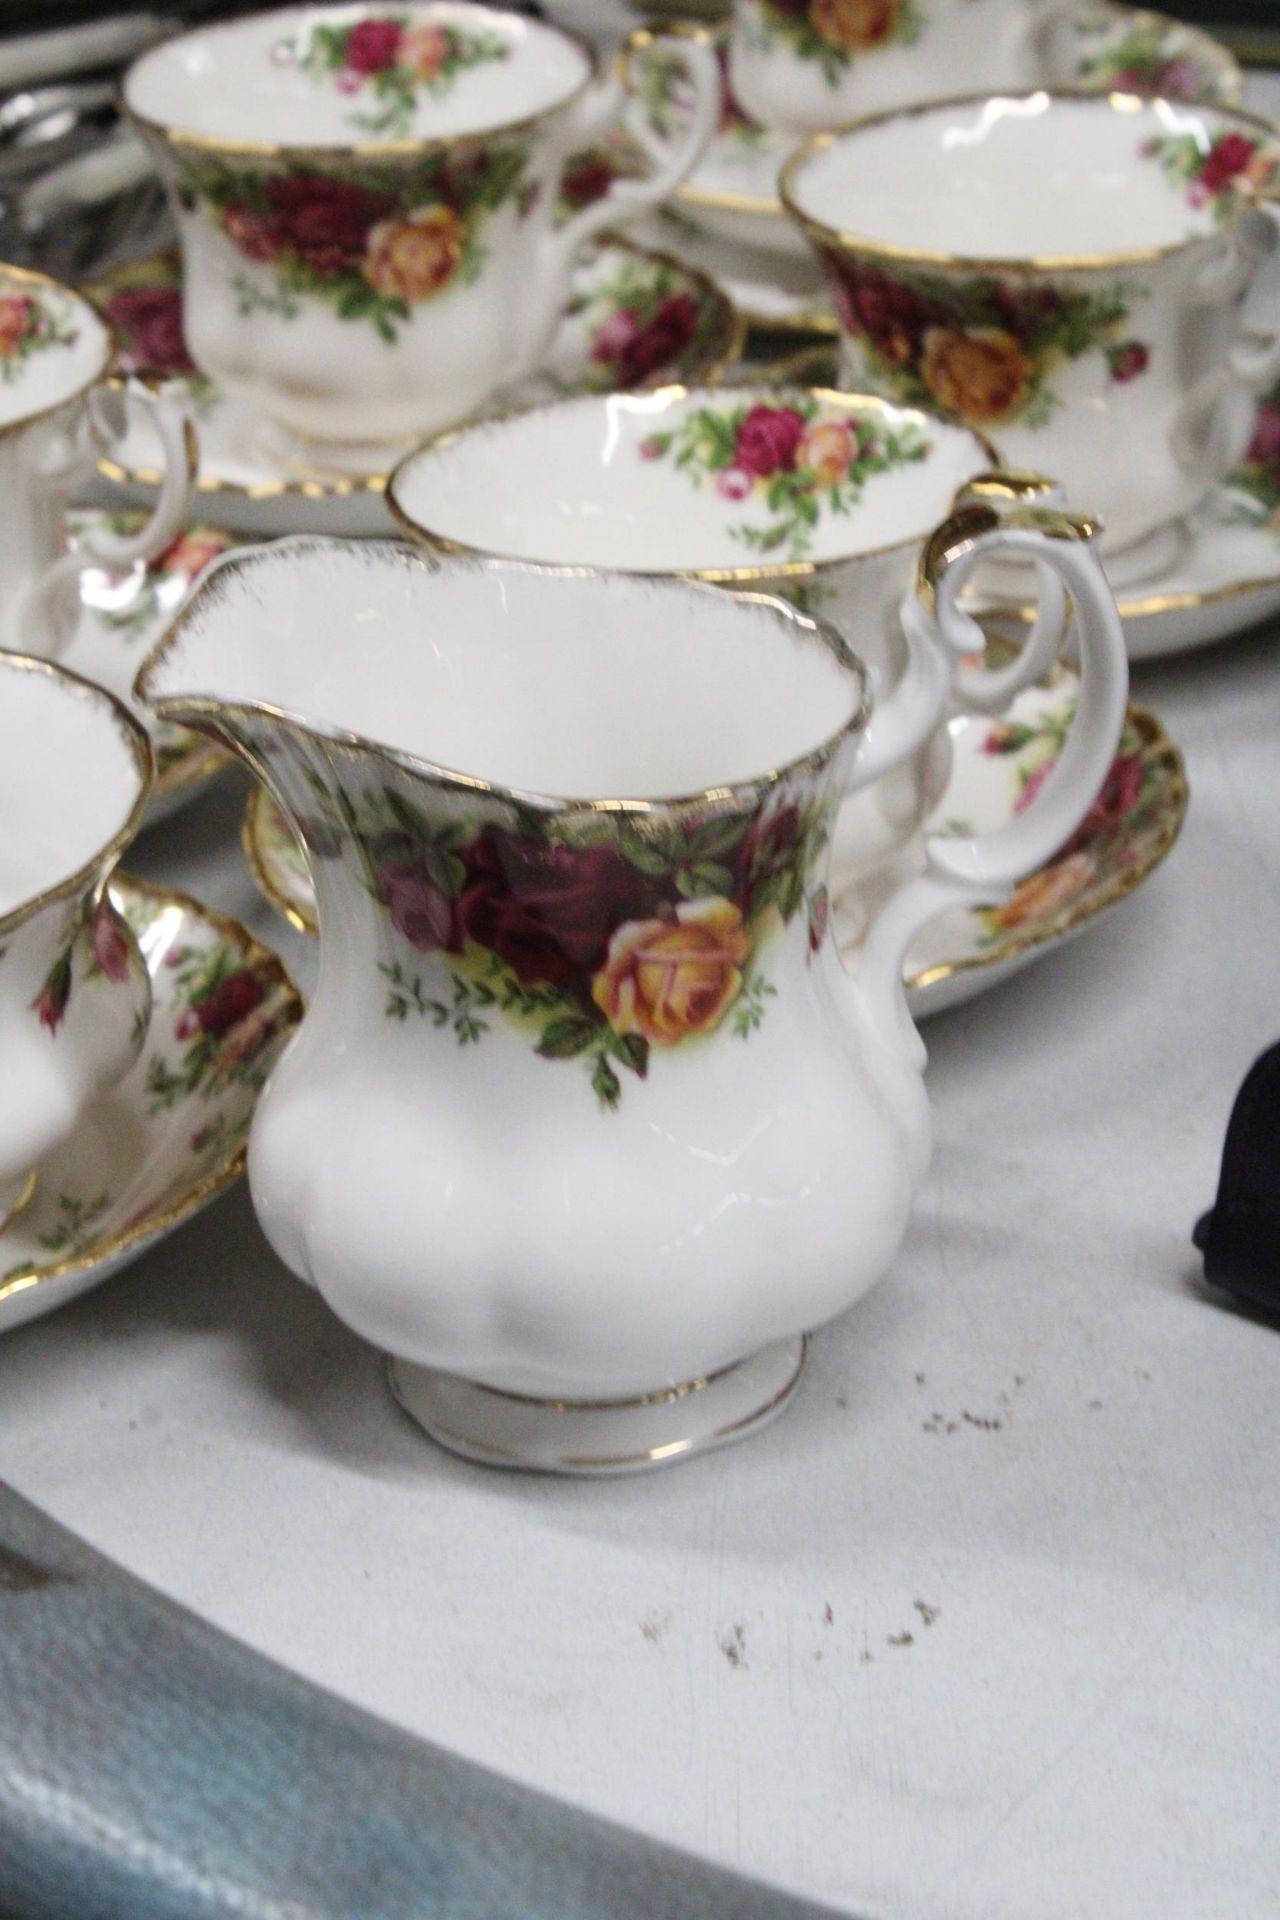 A QUANTITY OF ROYAL ALBERT 'OLD COUNTRY ROSES' TO INCLUDE CUPS, SAUCERS, A CREAM JUG AND SUGAR BOWL - Image 6 of 6